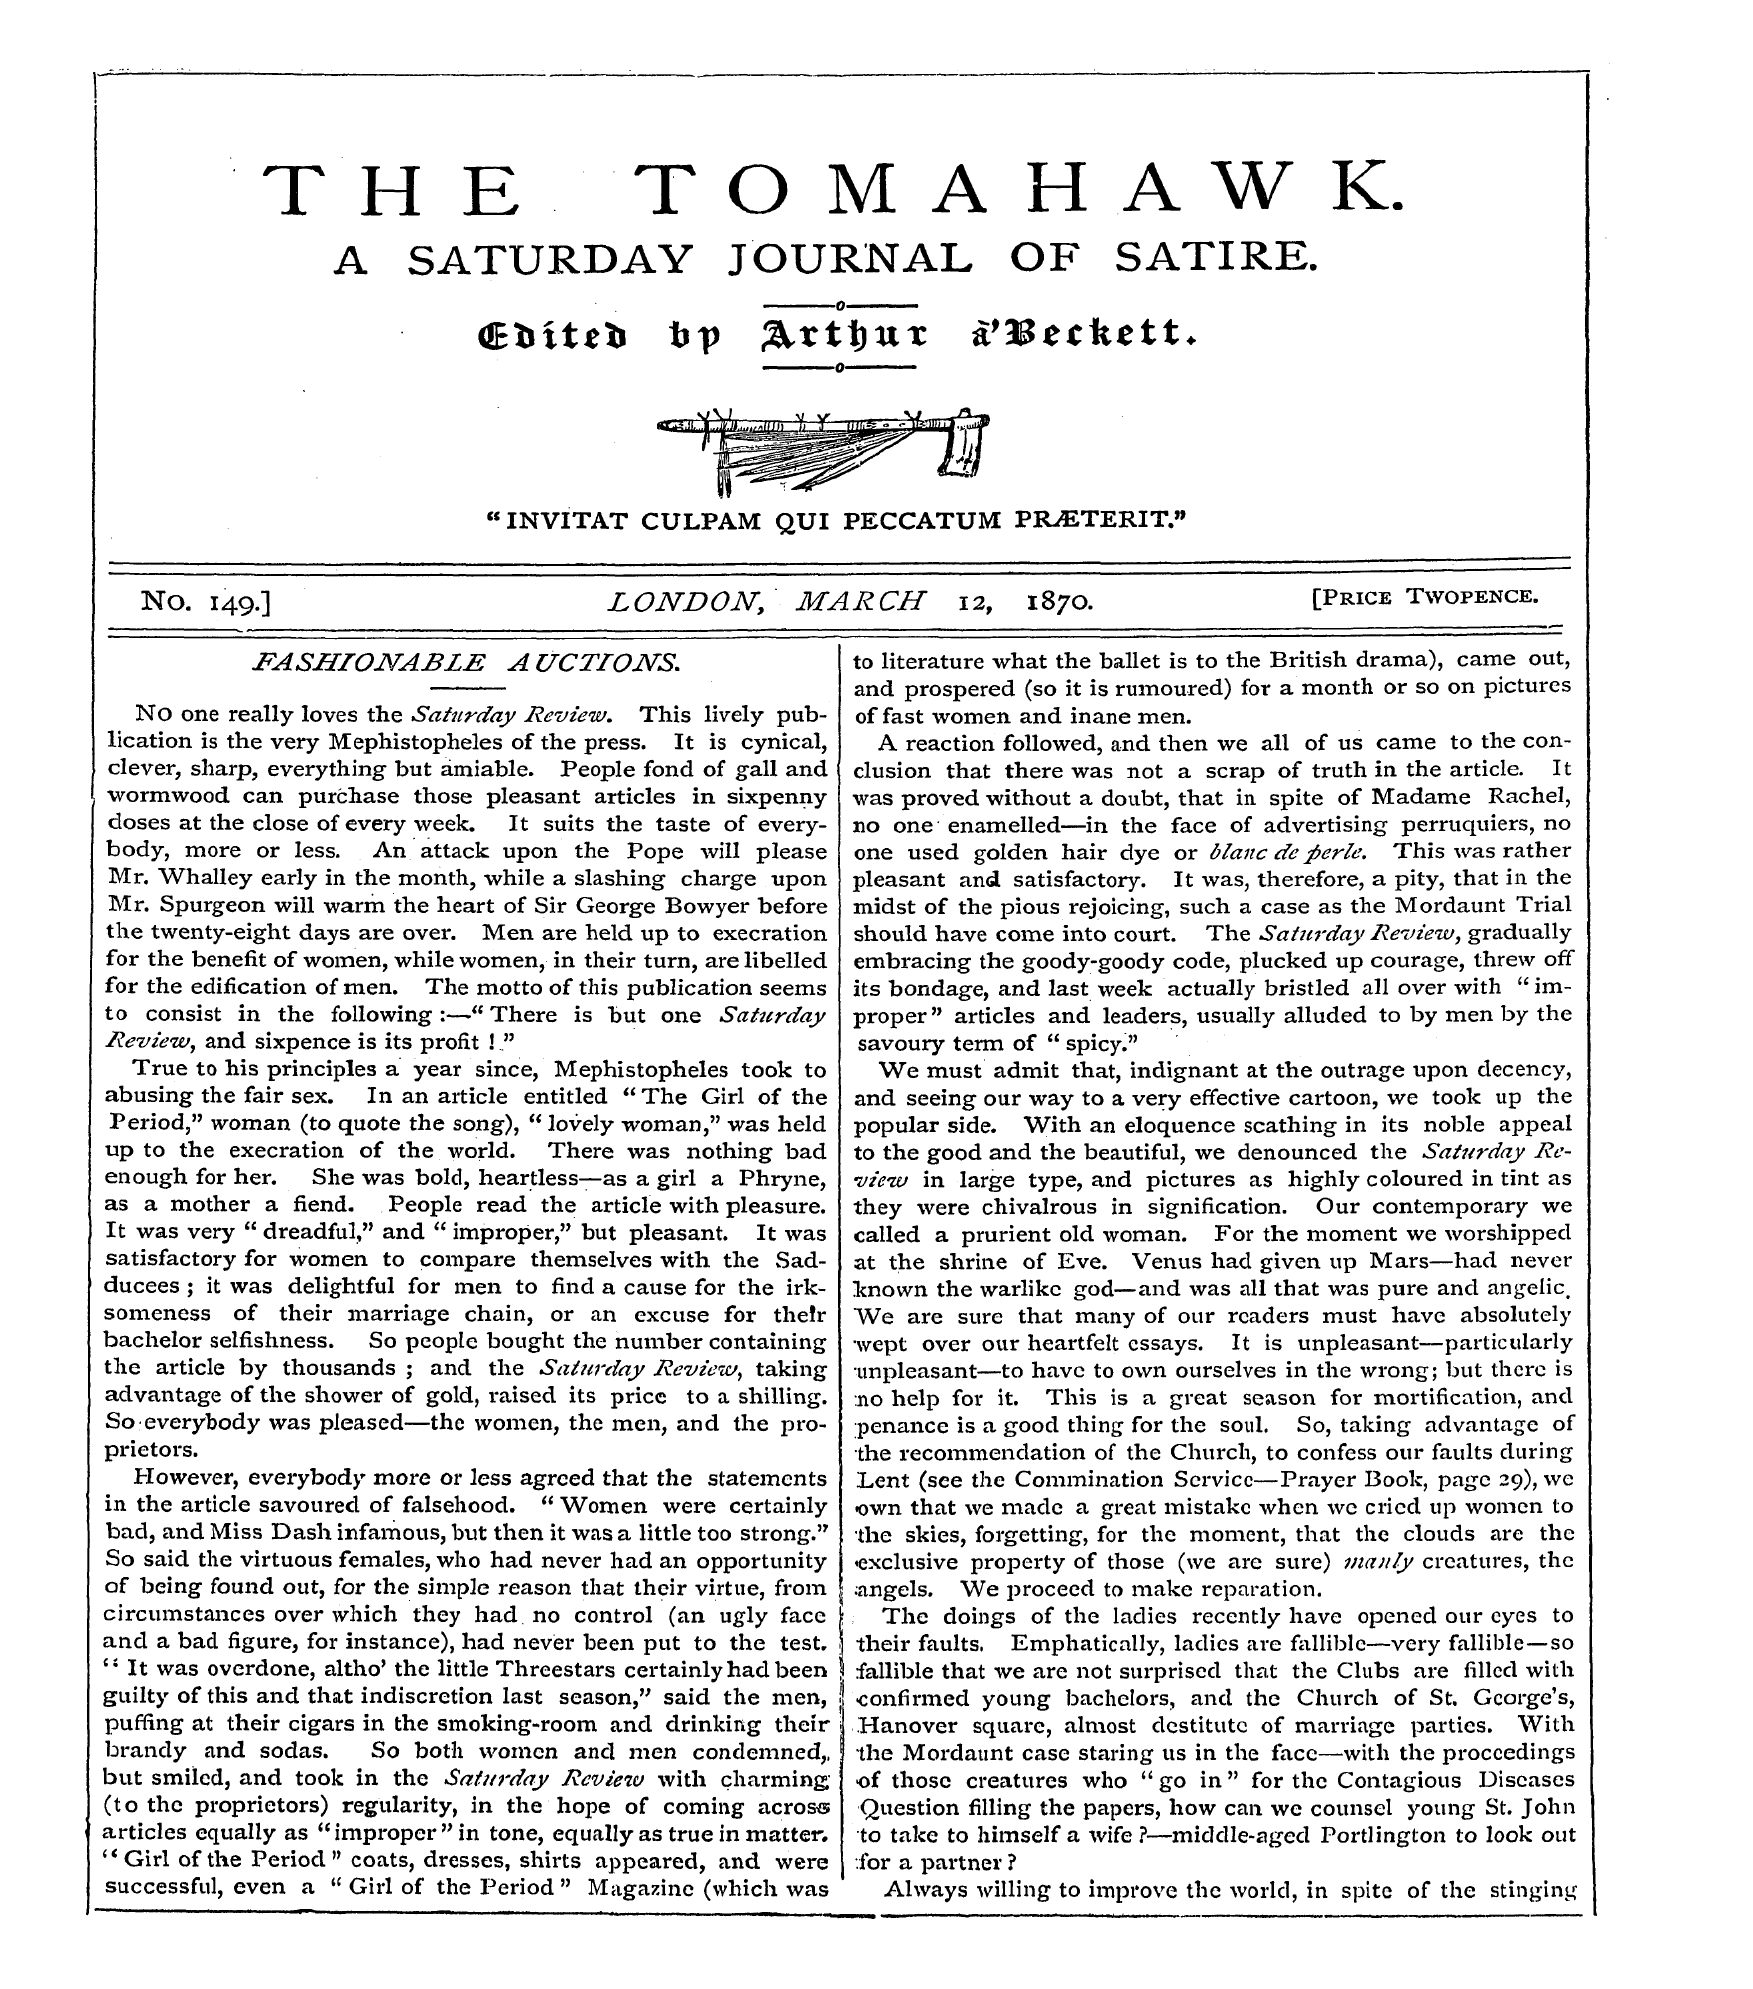 Tomahawk (1867-1870): jS F Y, 1st edition - No One Really Loves The Saturday Review....